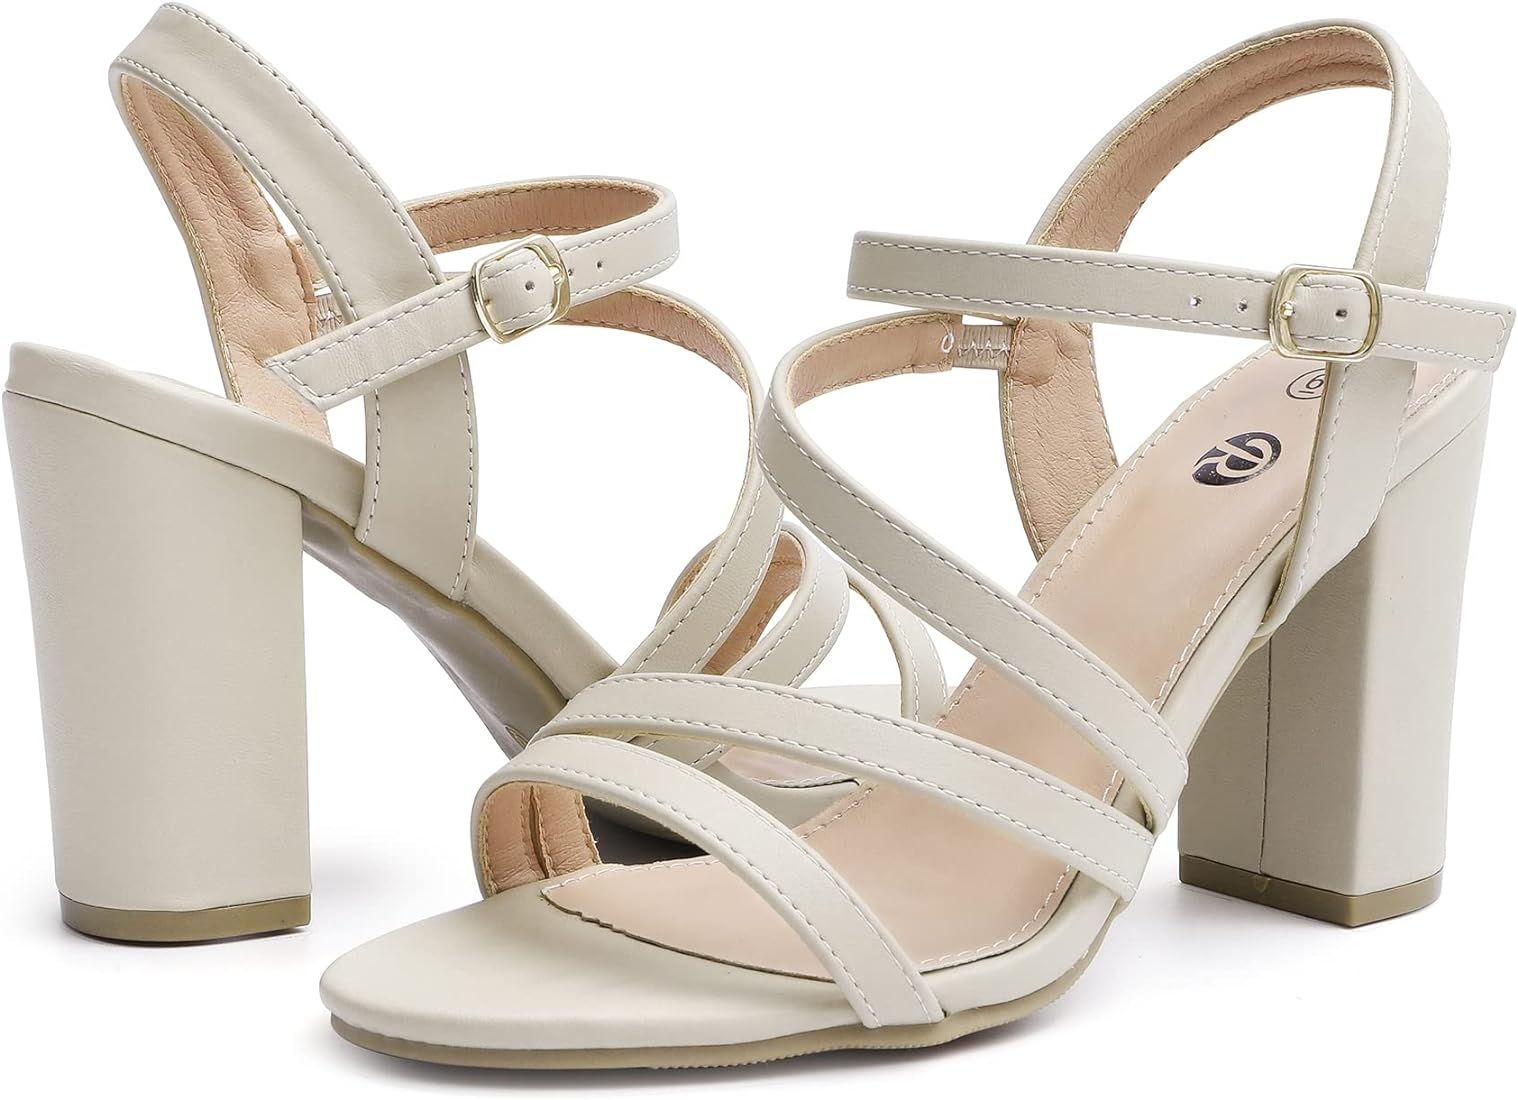 ▶DRESSY HEELED SANDALS: Strappy heels are heel height: 4" (approx), platform height: 0.25" (approx) | Amazon (US)